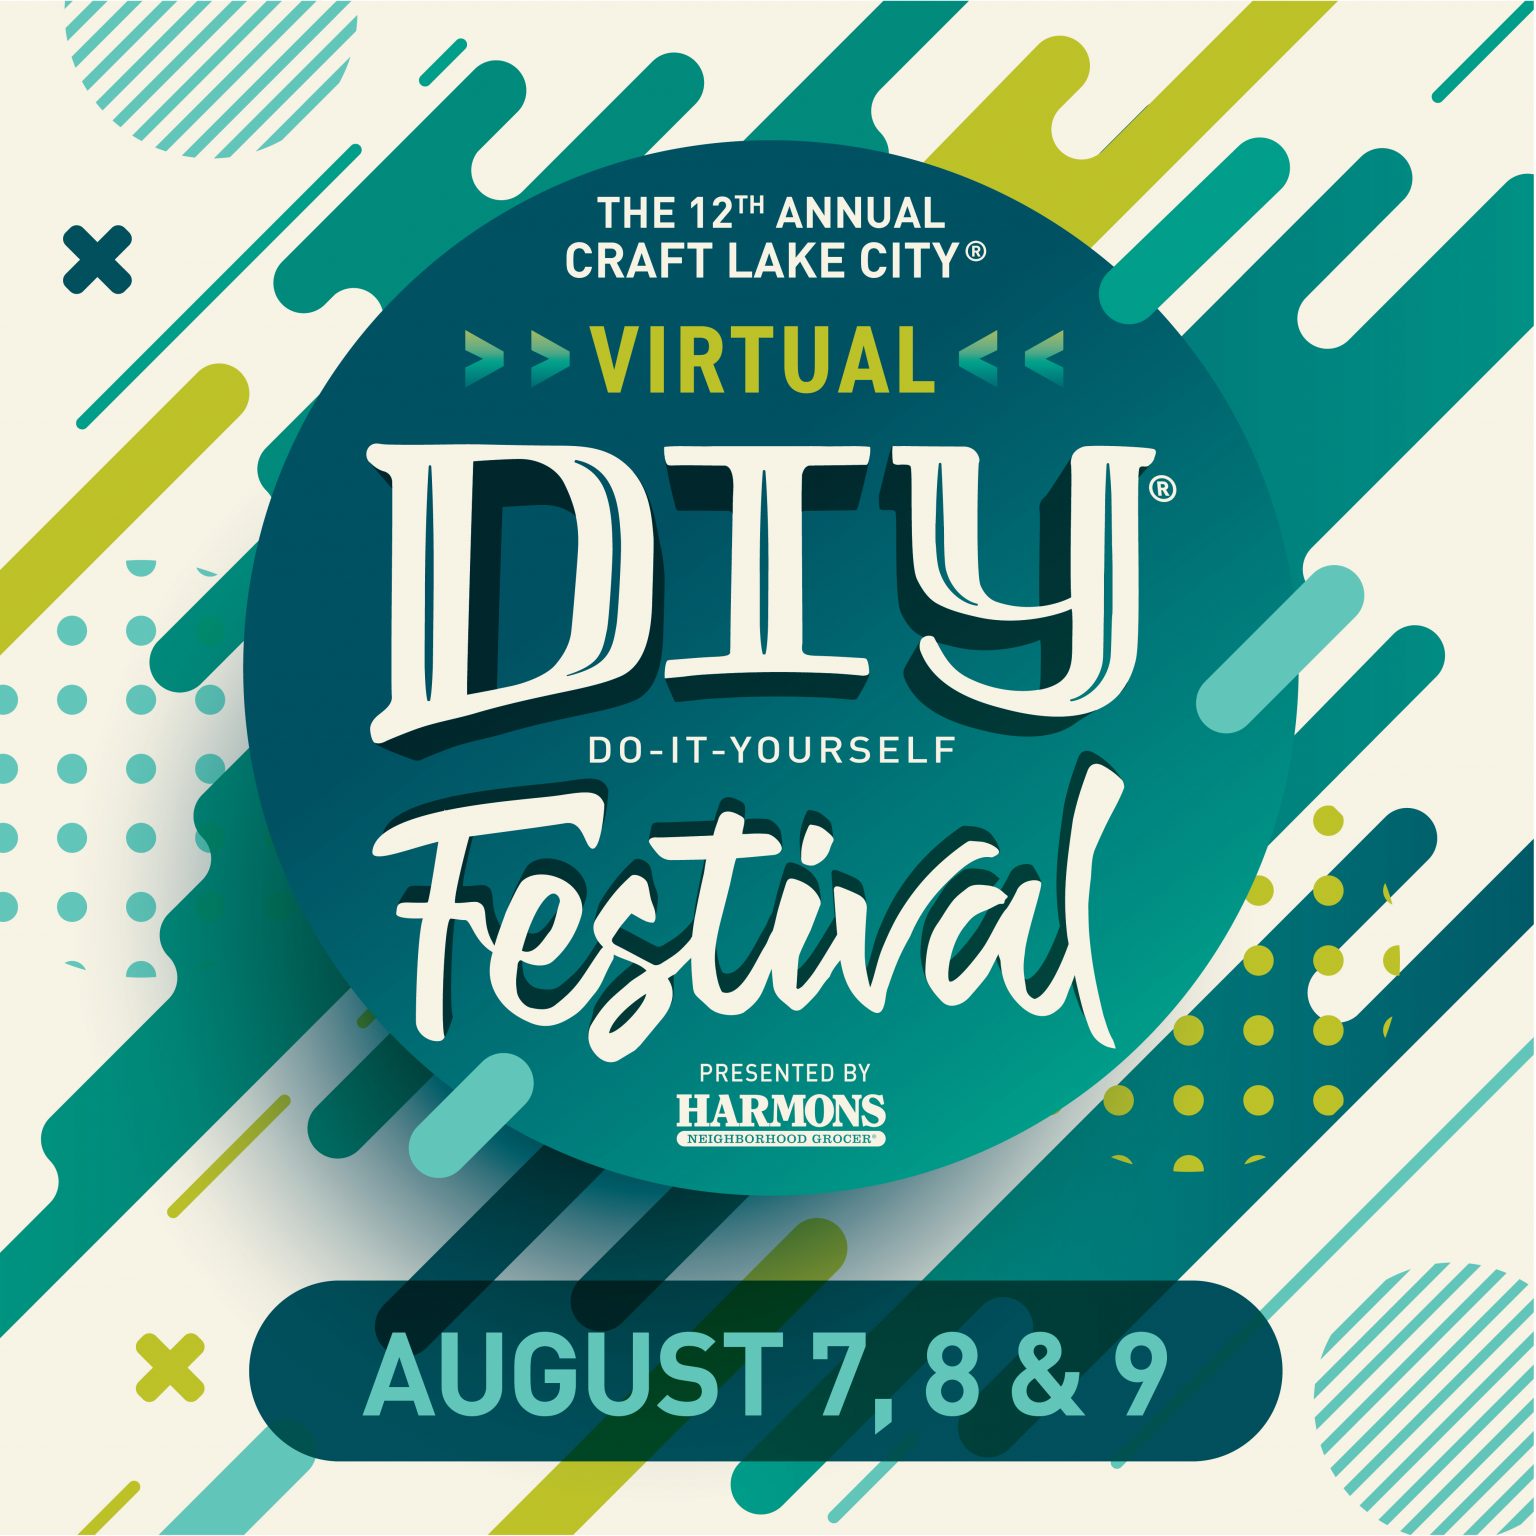 The 12th Annual Craft Lake City® DIY Festival® Presented By Harmons Is